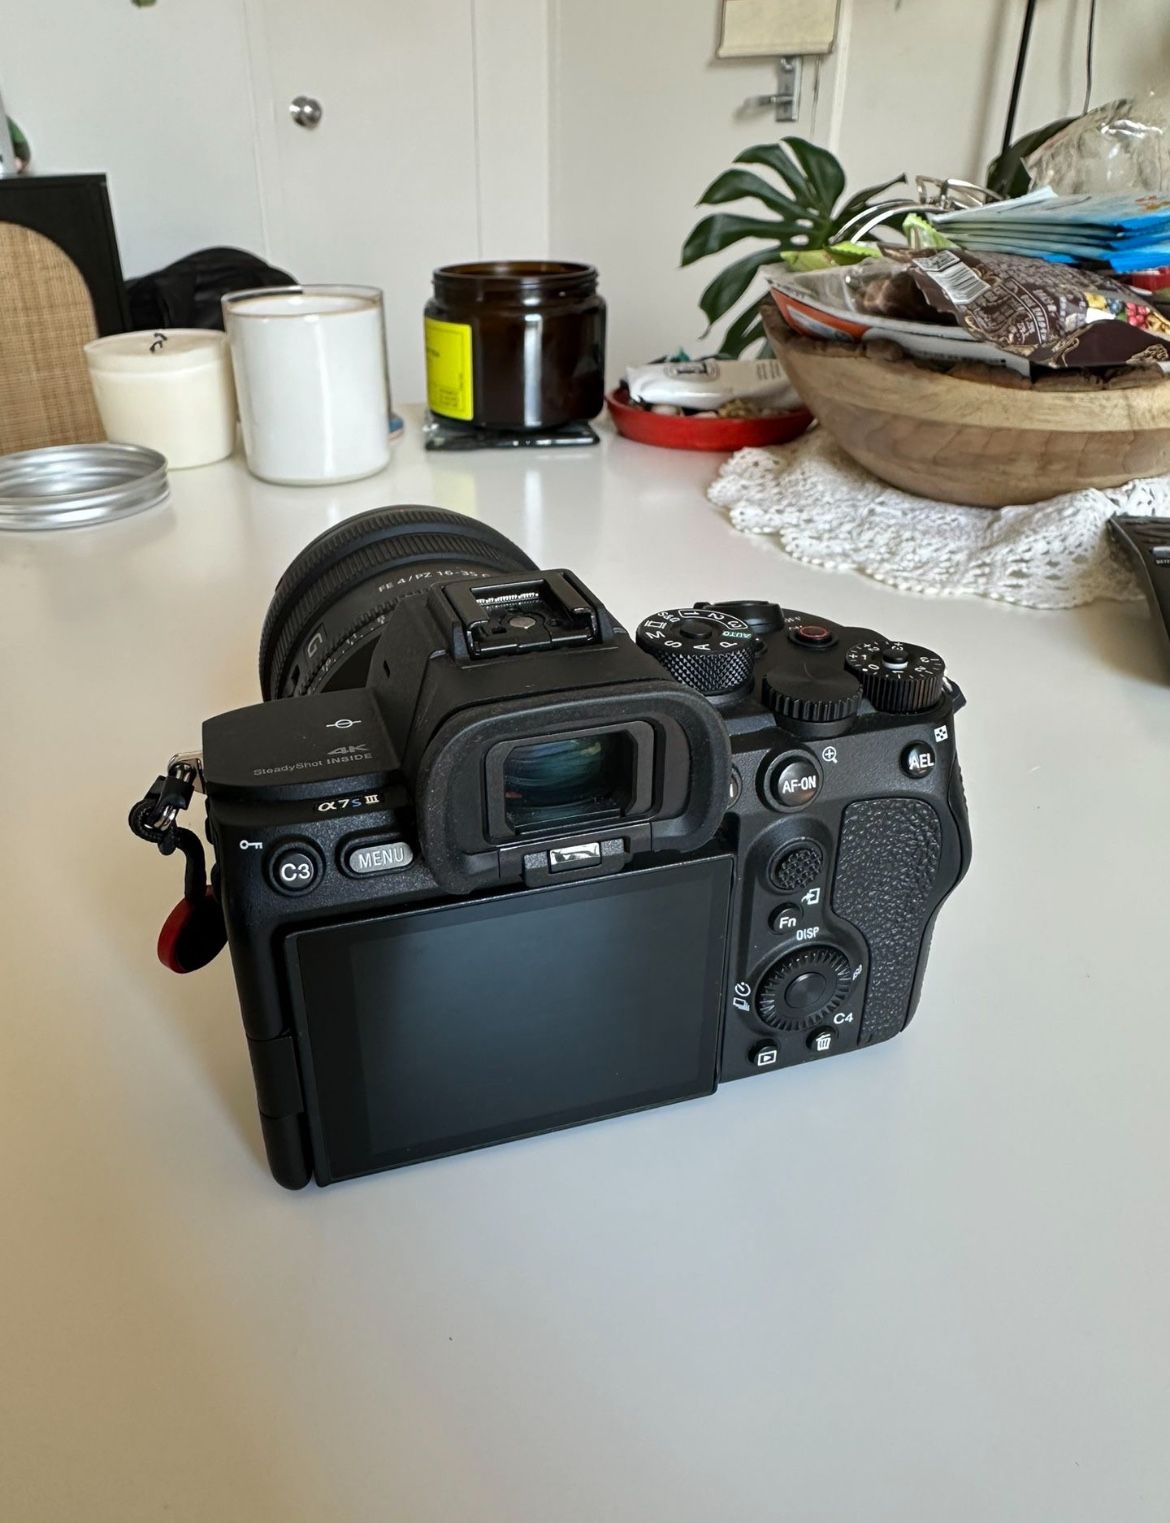 Sony - Alpha 7S Ill Full-frame Mirrorless Camera with PZ 16-35mm F4